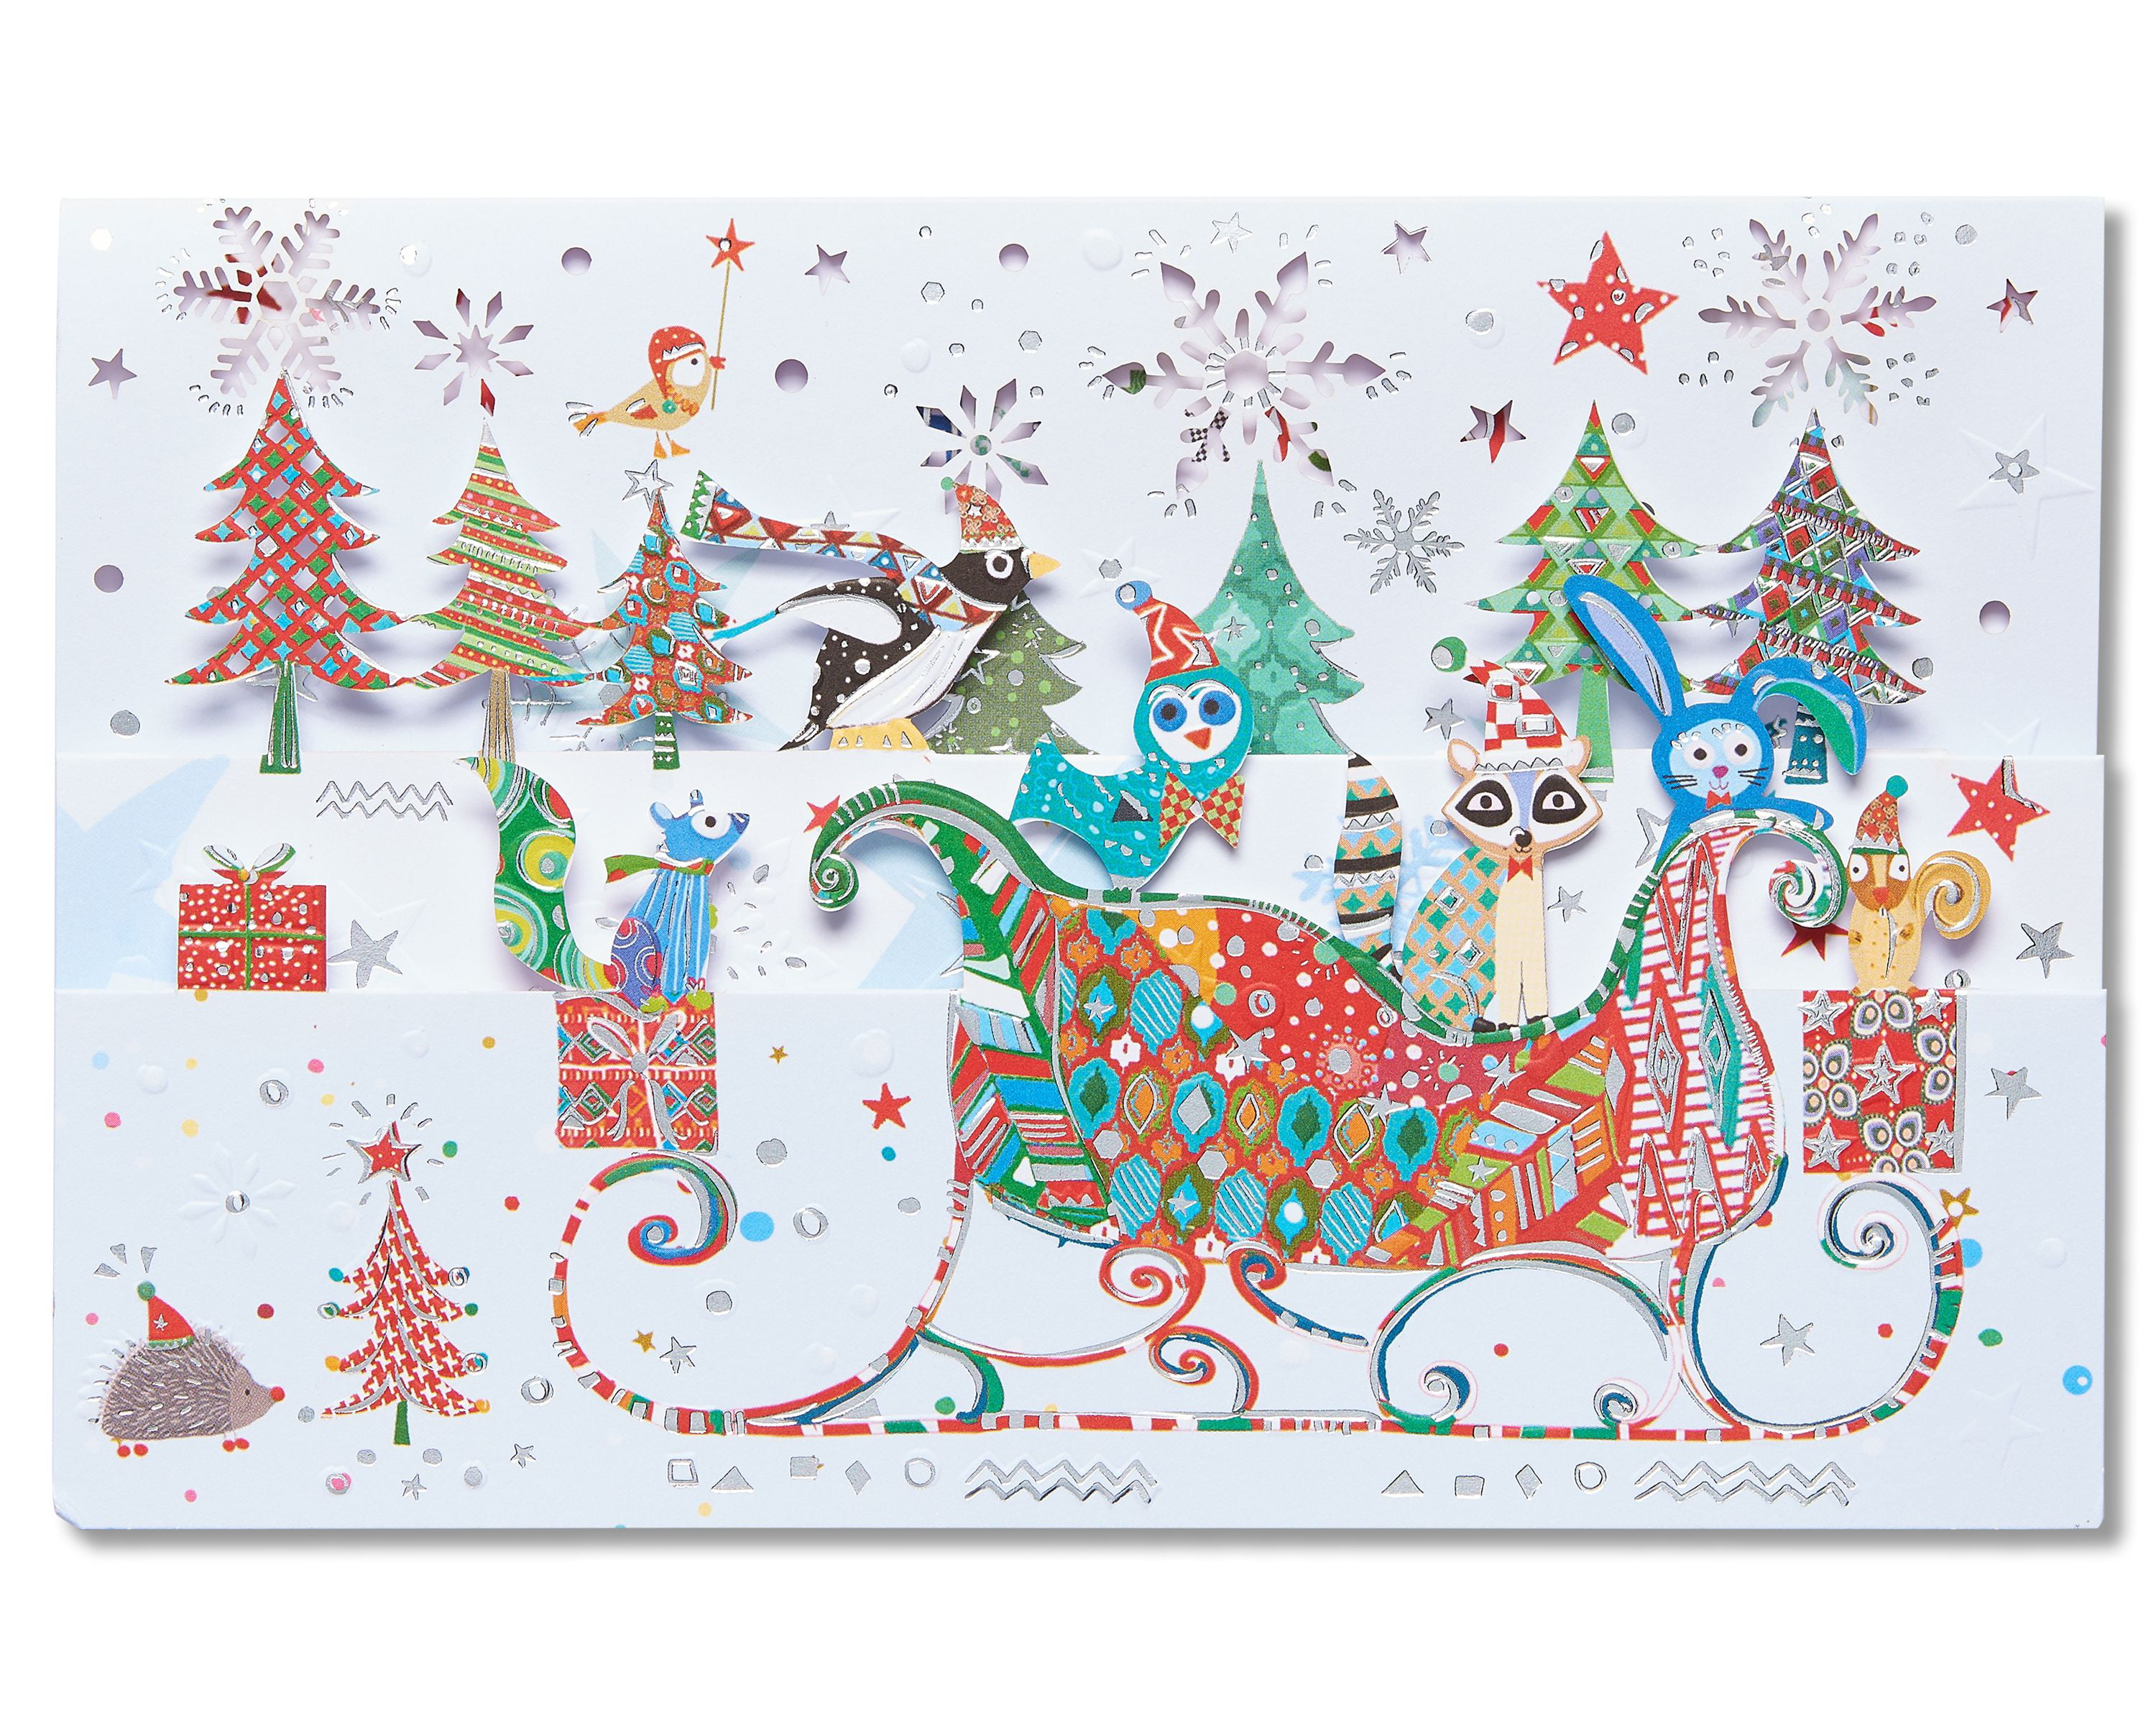 American Greetings Christmas Wishes Christmas Card with Foil - Walmart